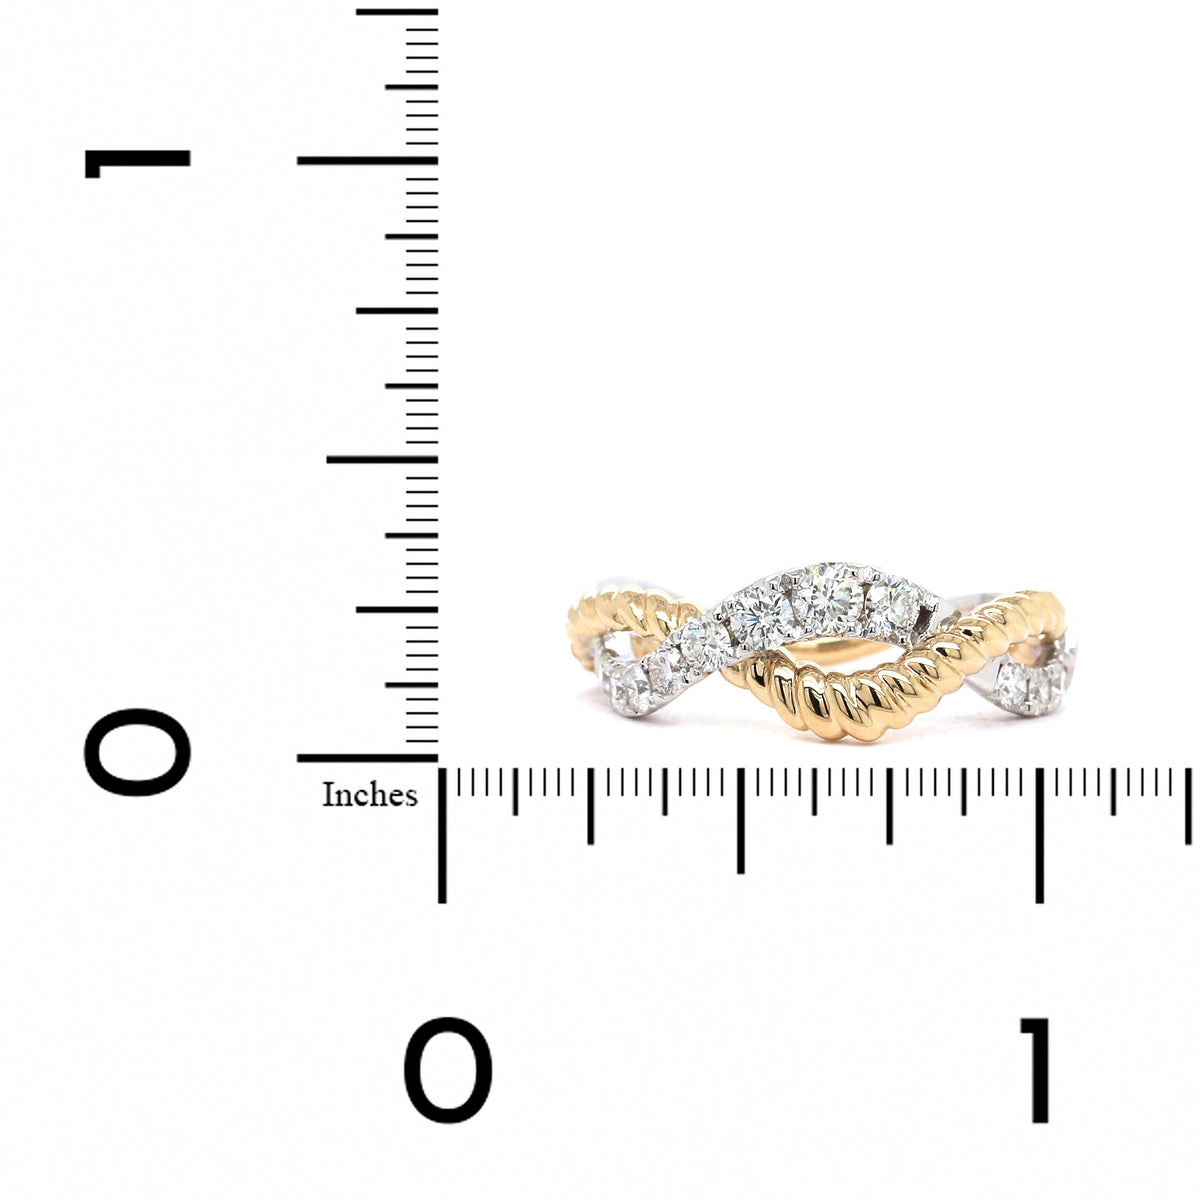 14K Yellow and White Gold Cable Diamond Twist Ring